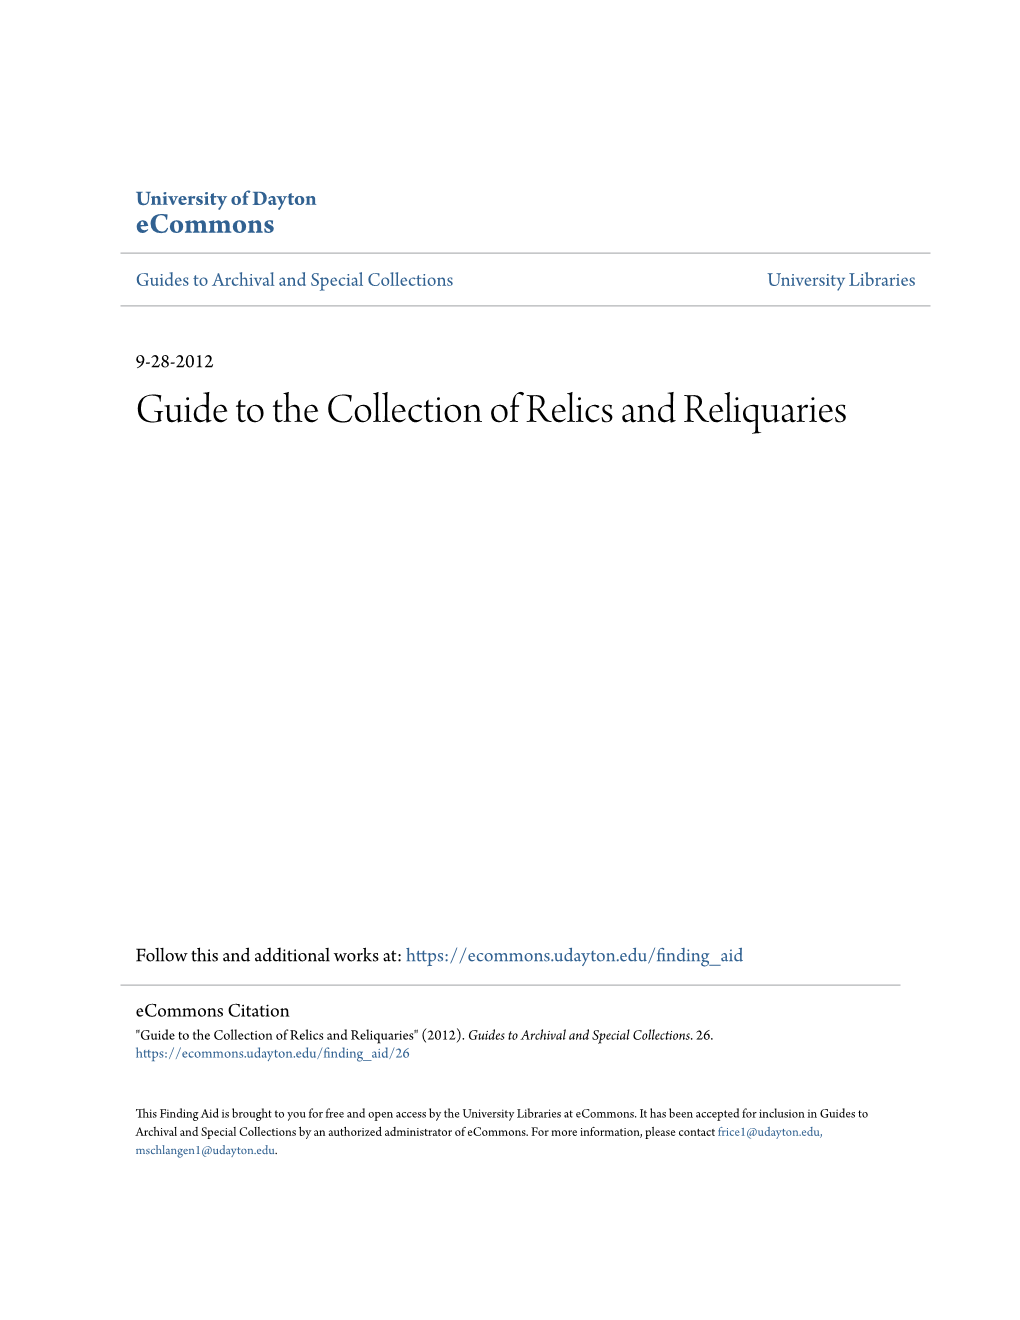 Guide to the Collection of Relics and Reliquaries